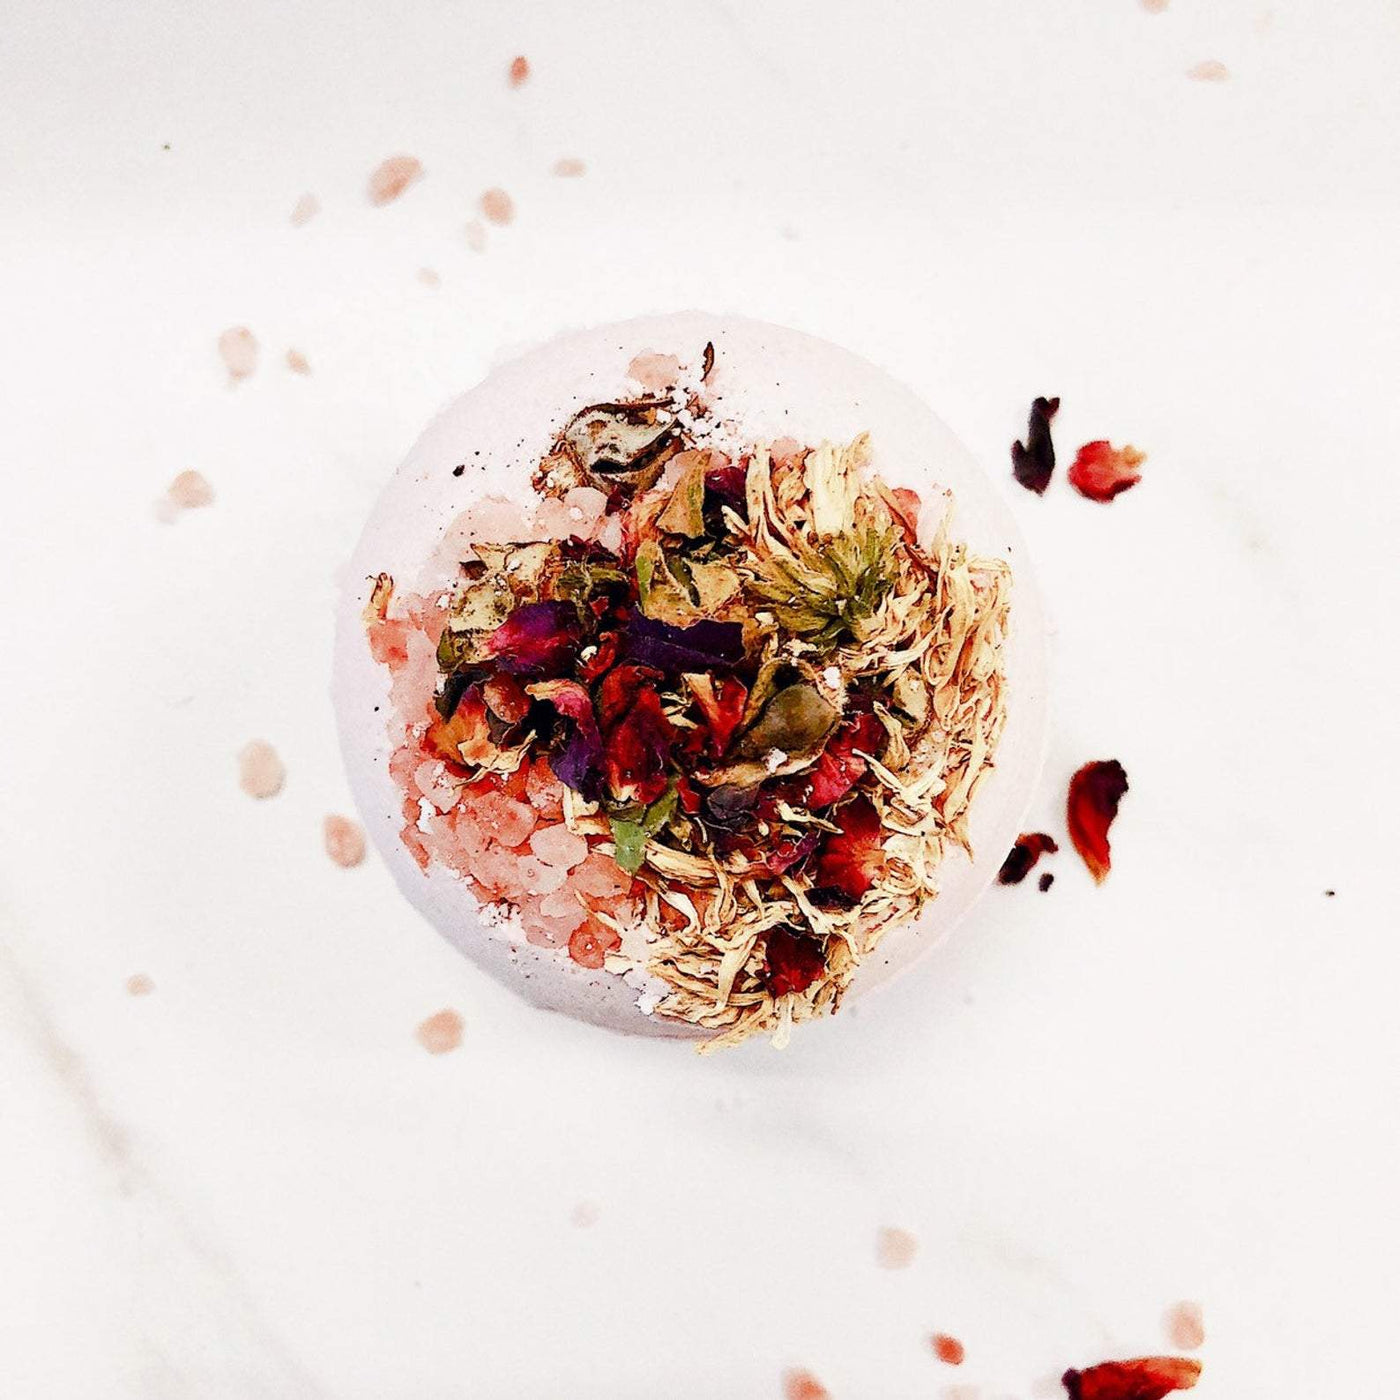 Organic Vegan Cruelty-Free Bath Bomb (with Crystal Inside) - Roses & Chains | Fashionable Clothing, Shoes, Accessories, & More